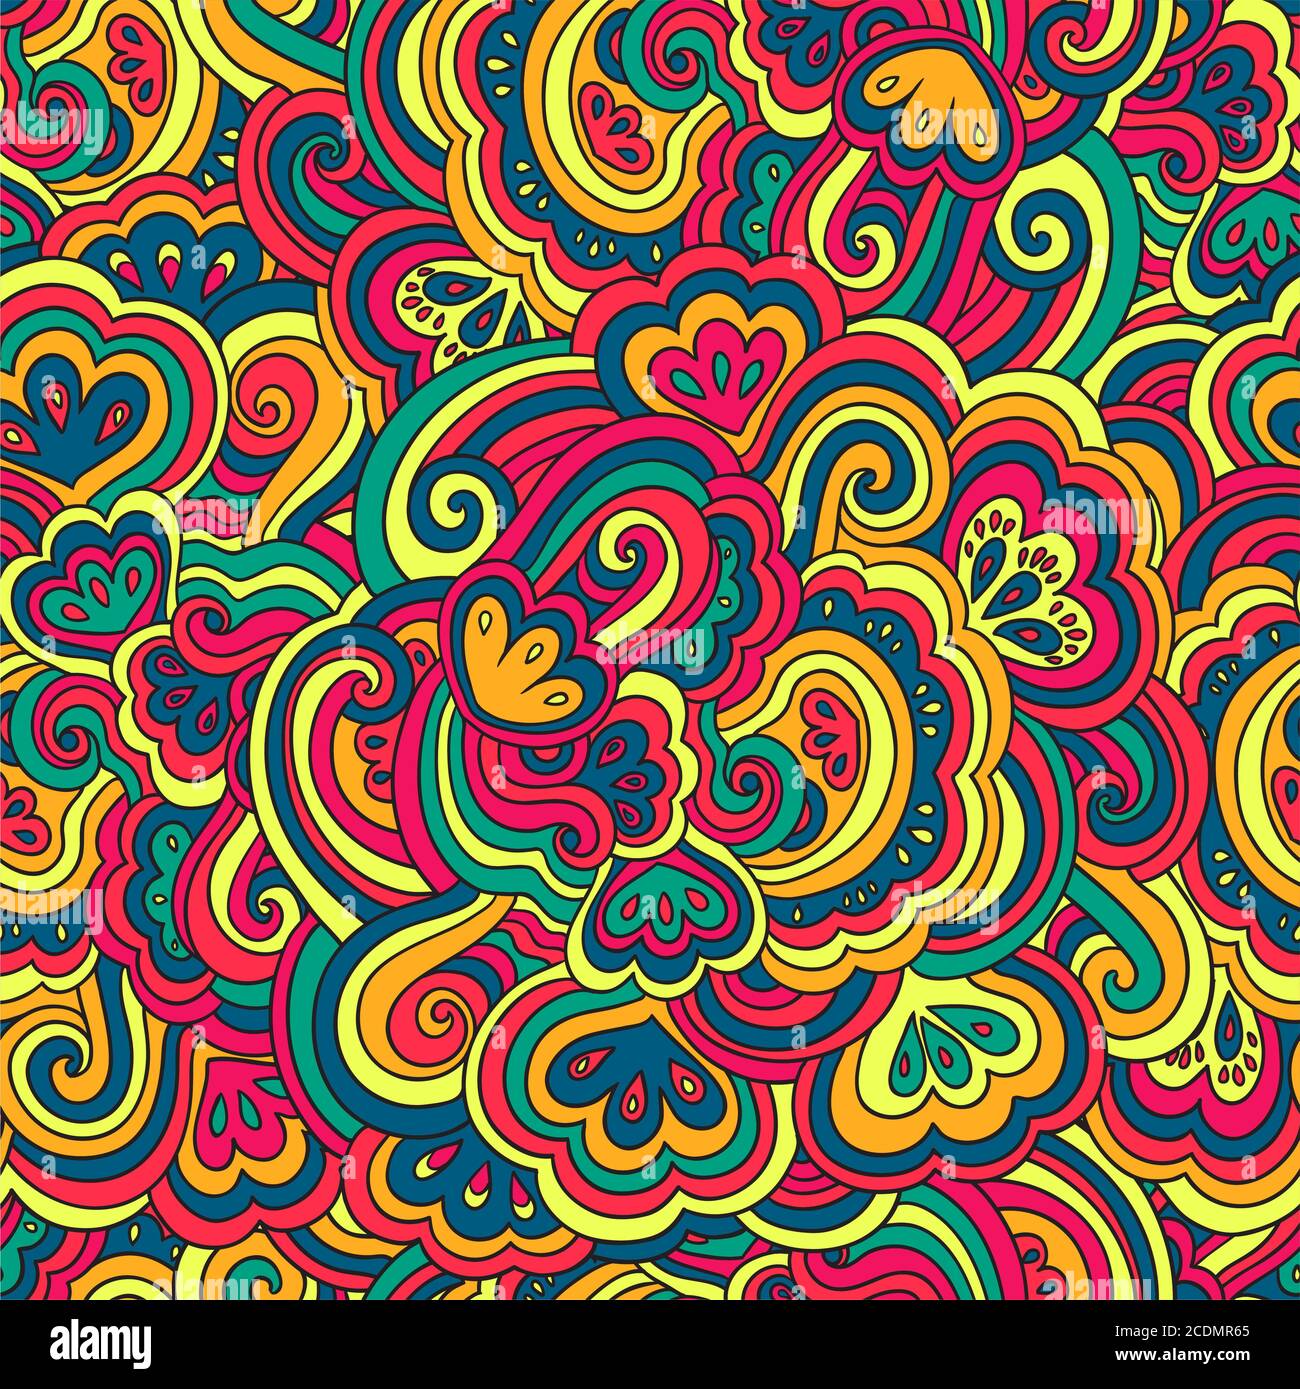 Psychedelic wall art Stock Vector Images - Page 3 - Alamy